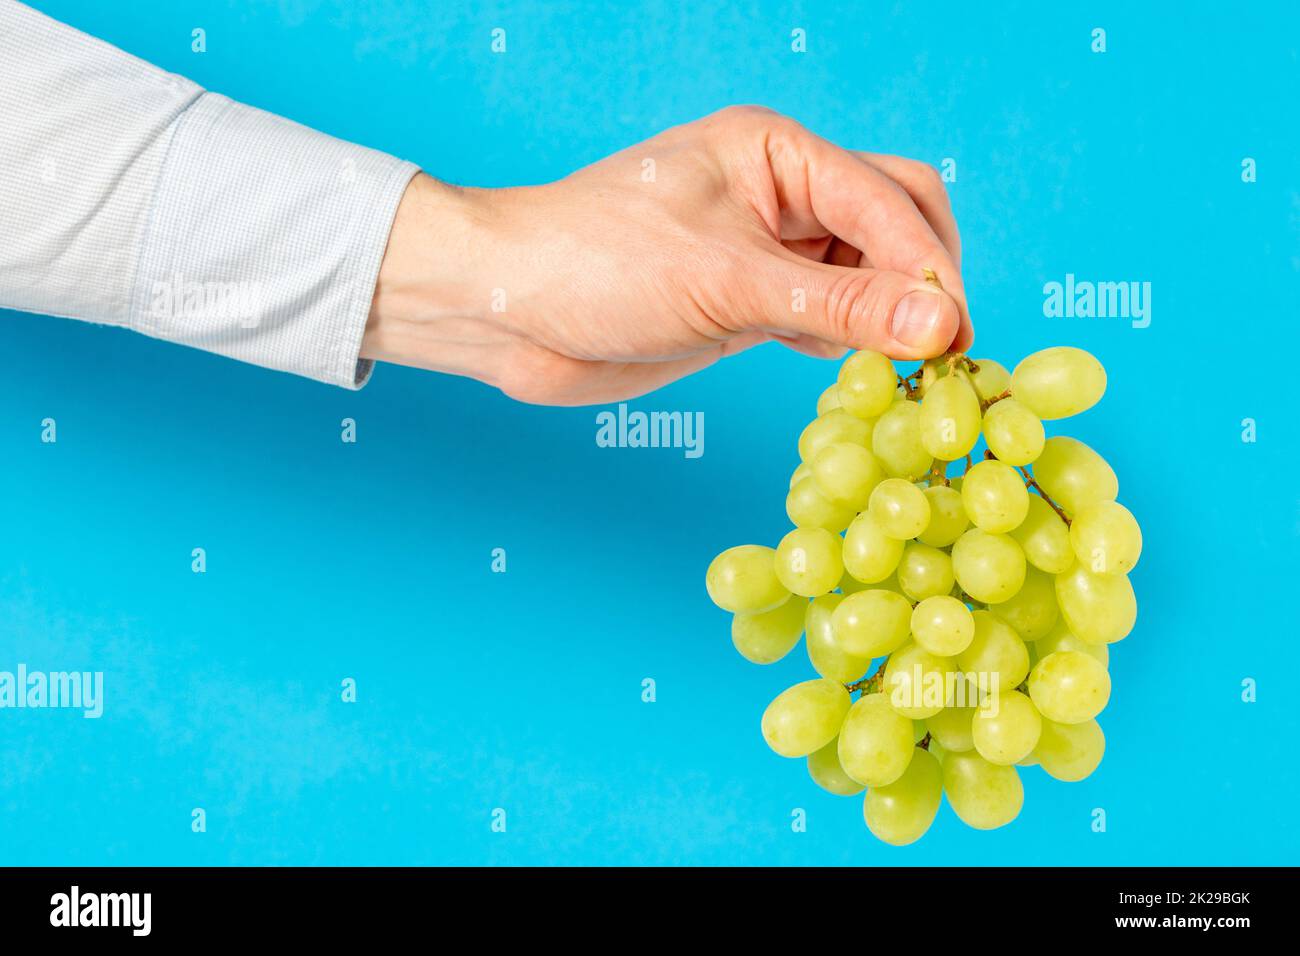 Bunch of grapes in the hand Stock Photo